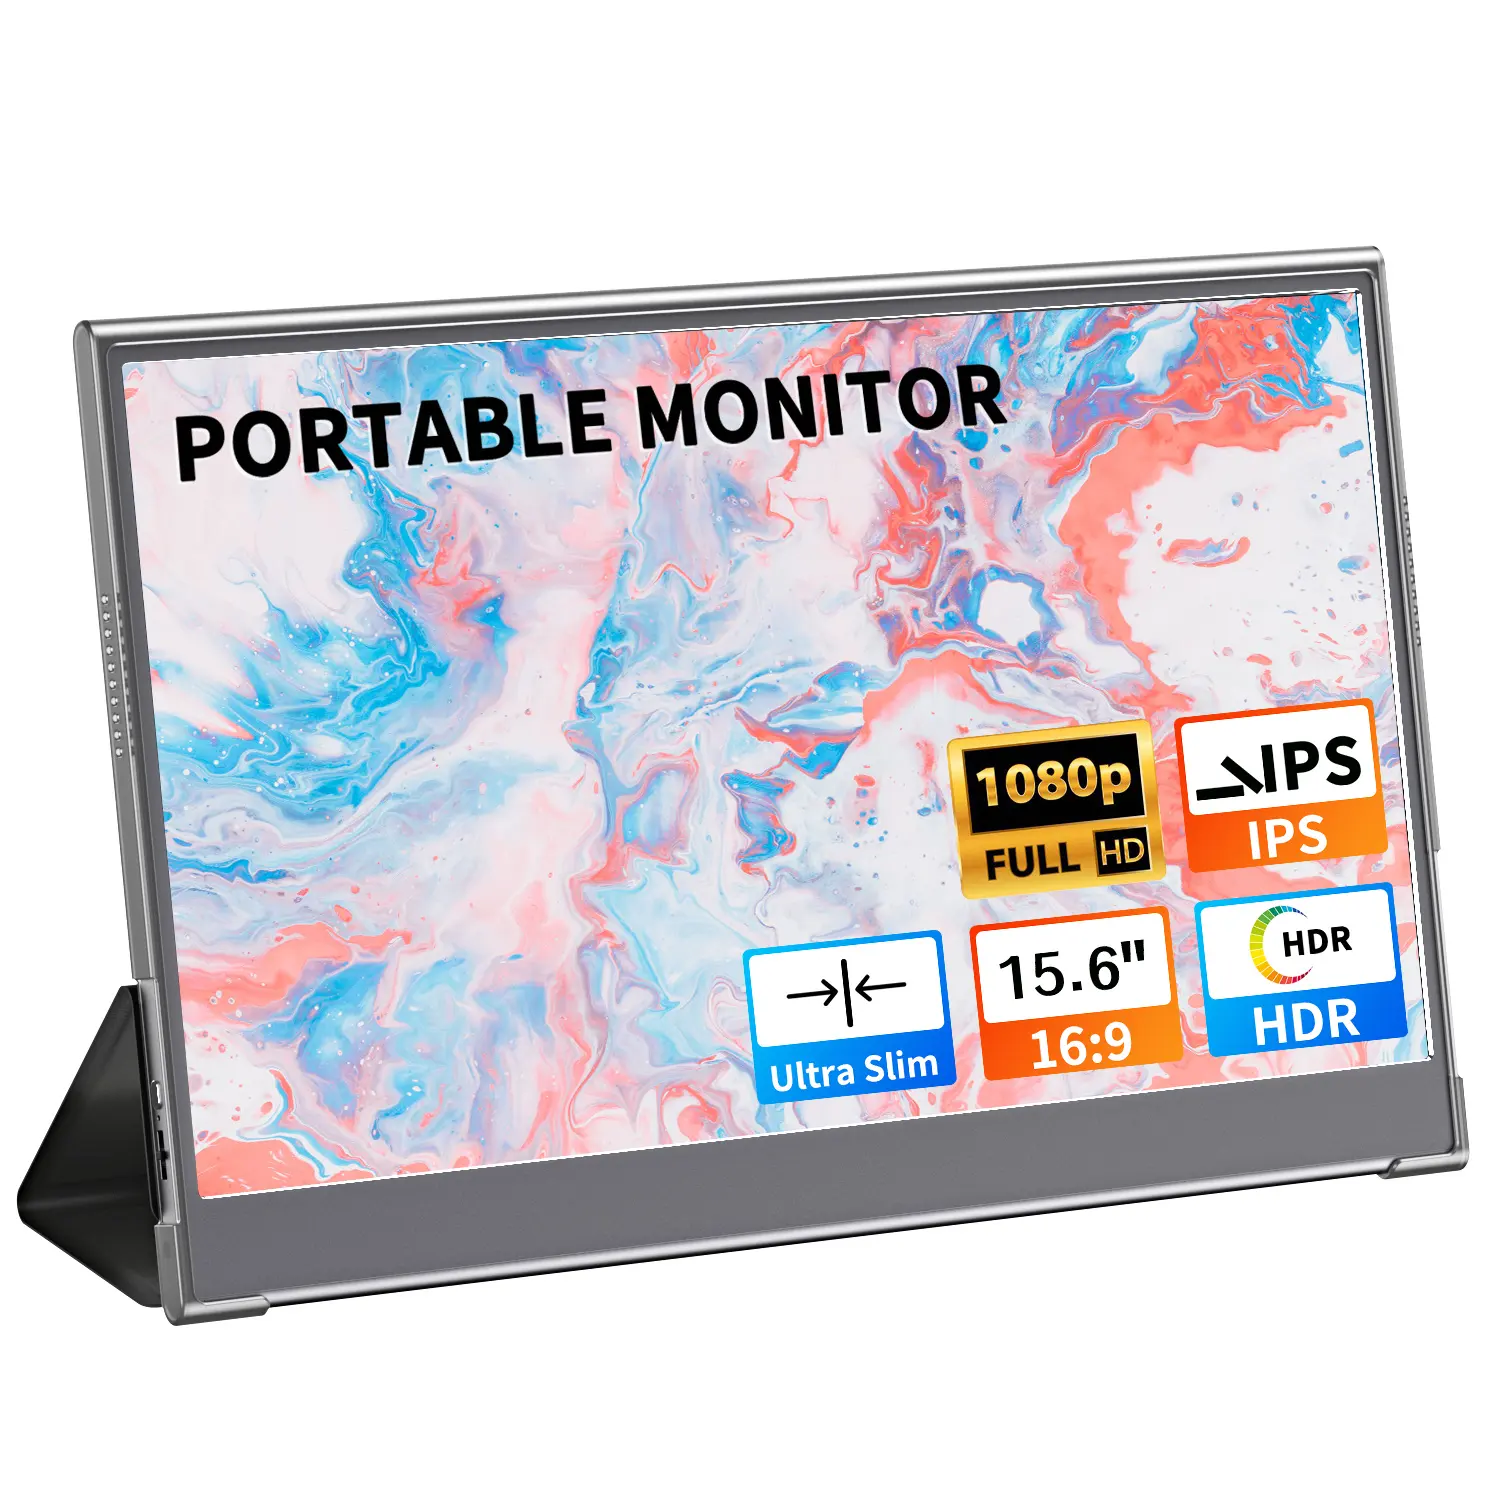 15.6 inch monitor 1080p screen type c double 3ms response ips portable gaming monitors 4k